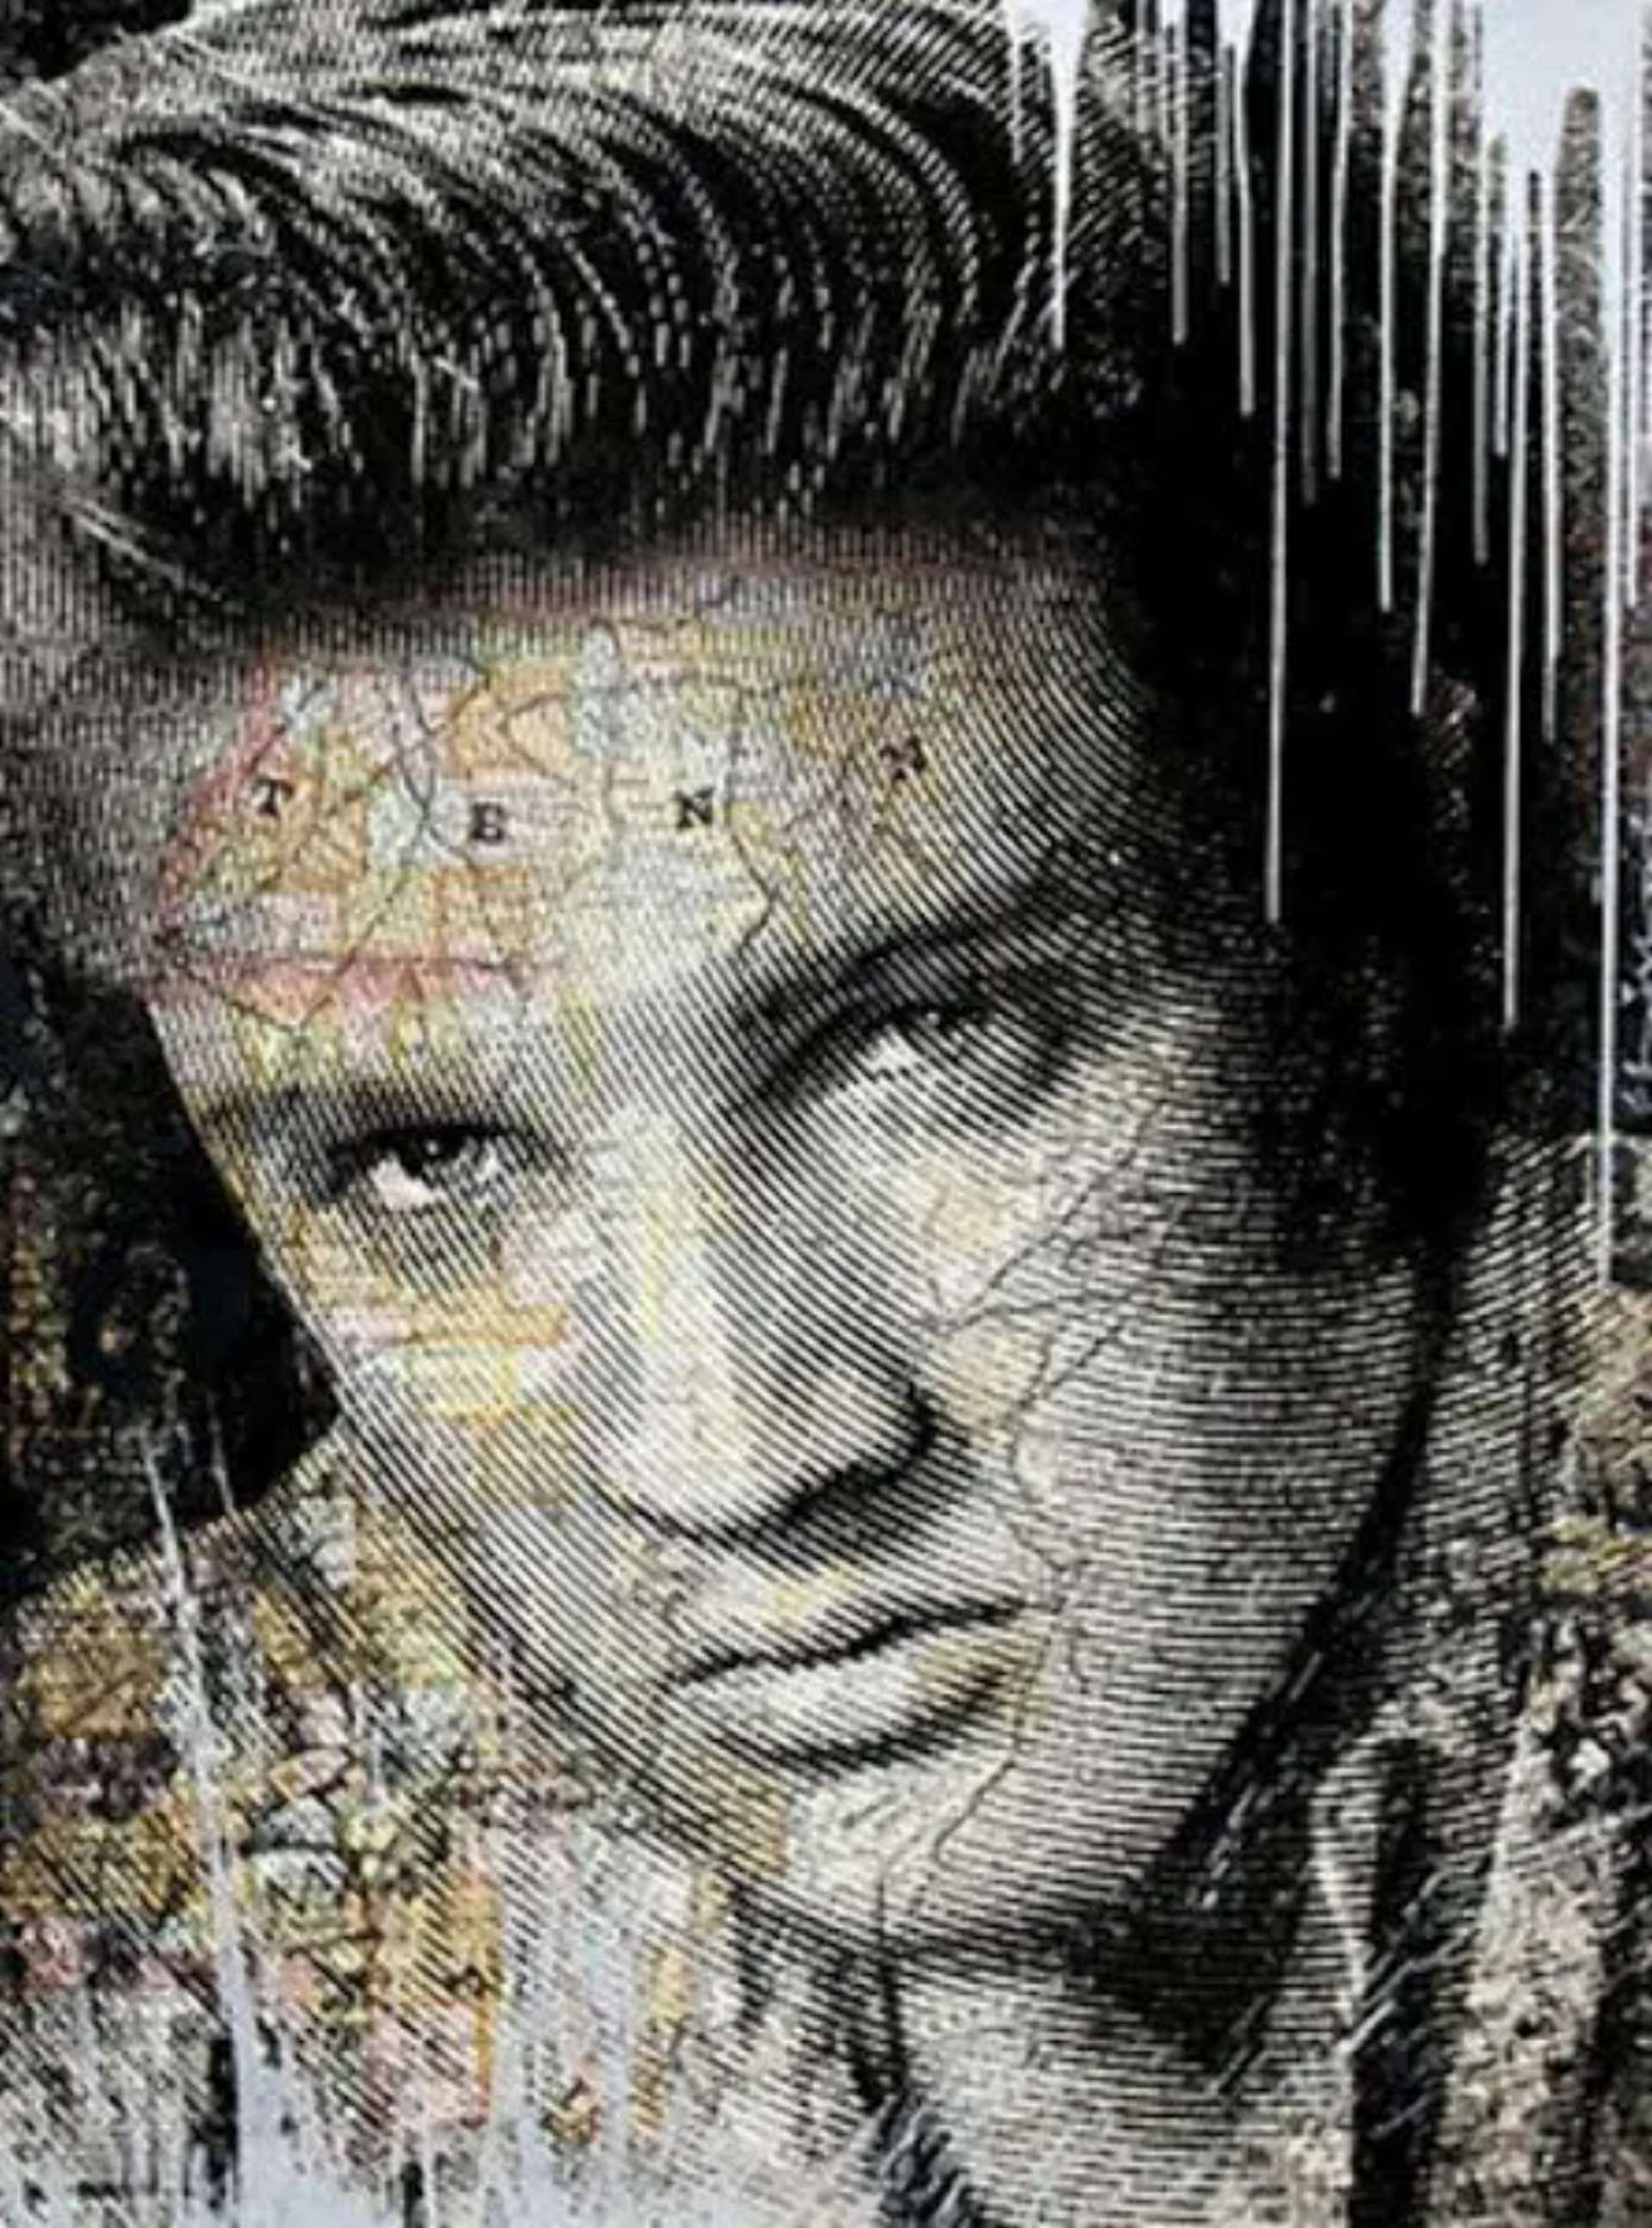 King of Rock and Roll © Mr. Brainwash